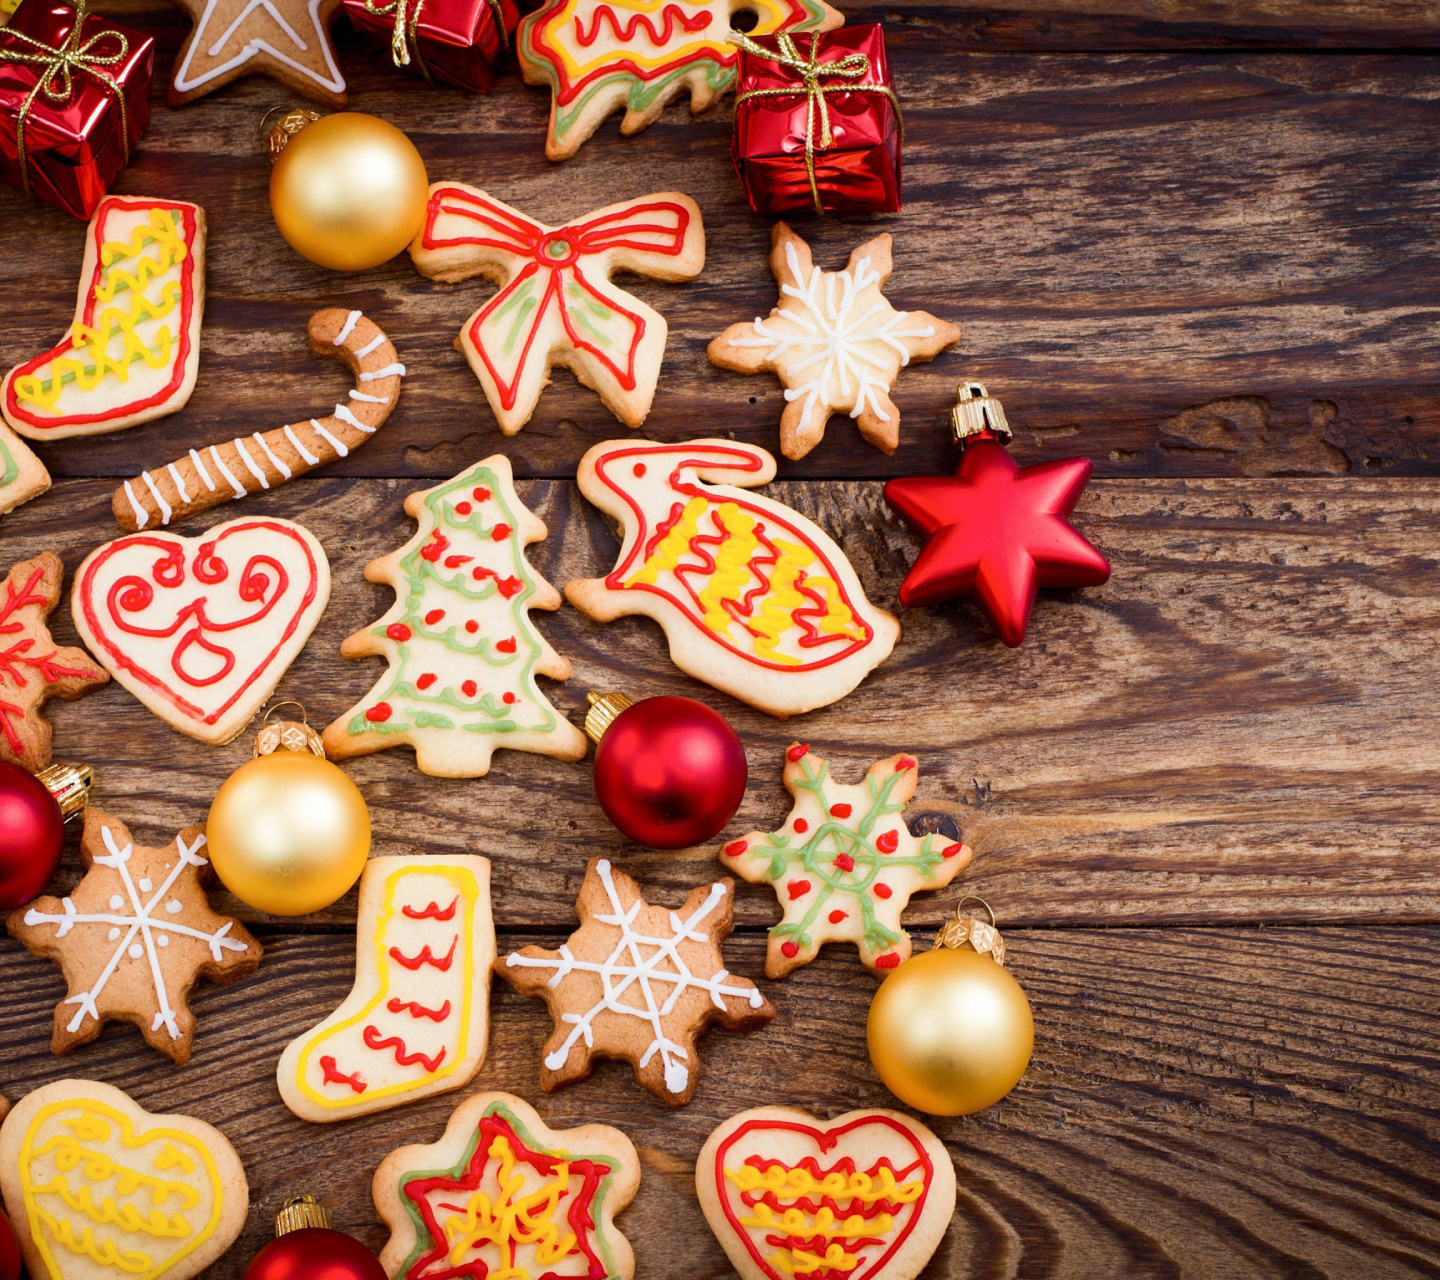 Das Christmas Decorations Cookies and Balls Wallpaper 1440x1280